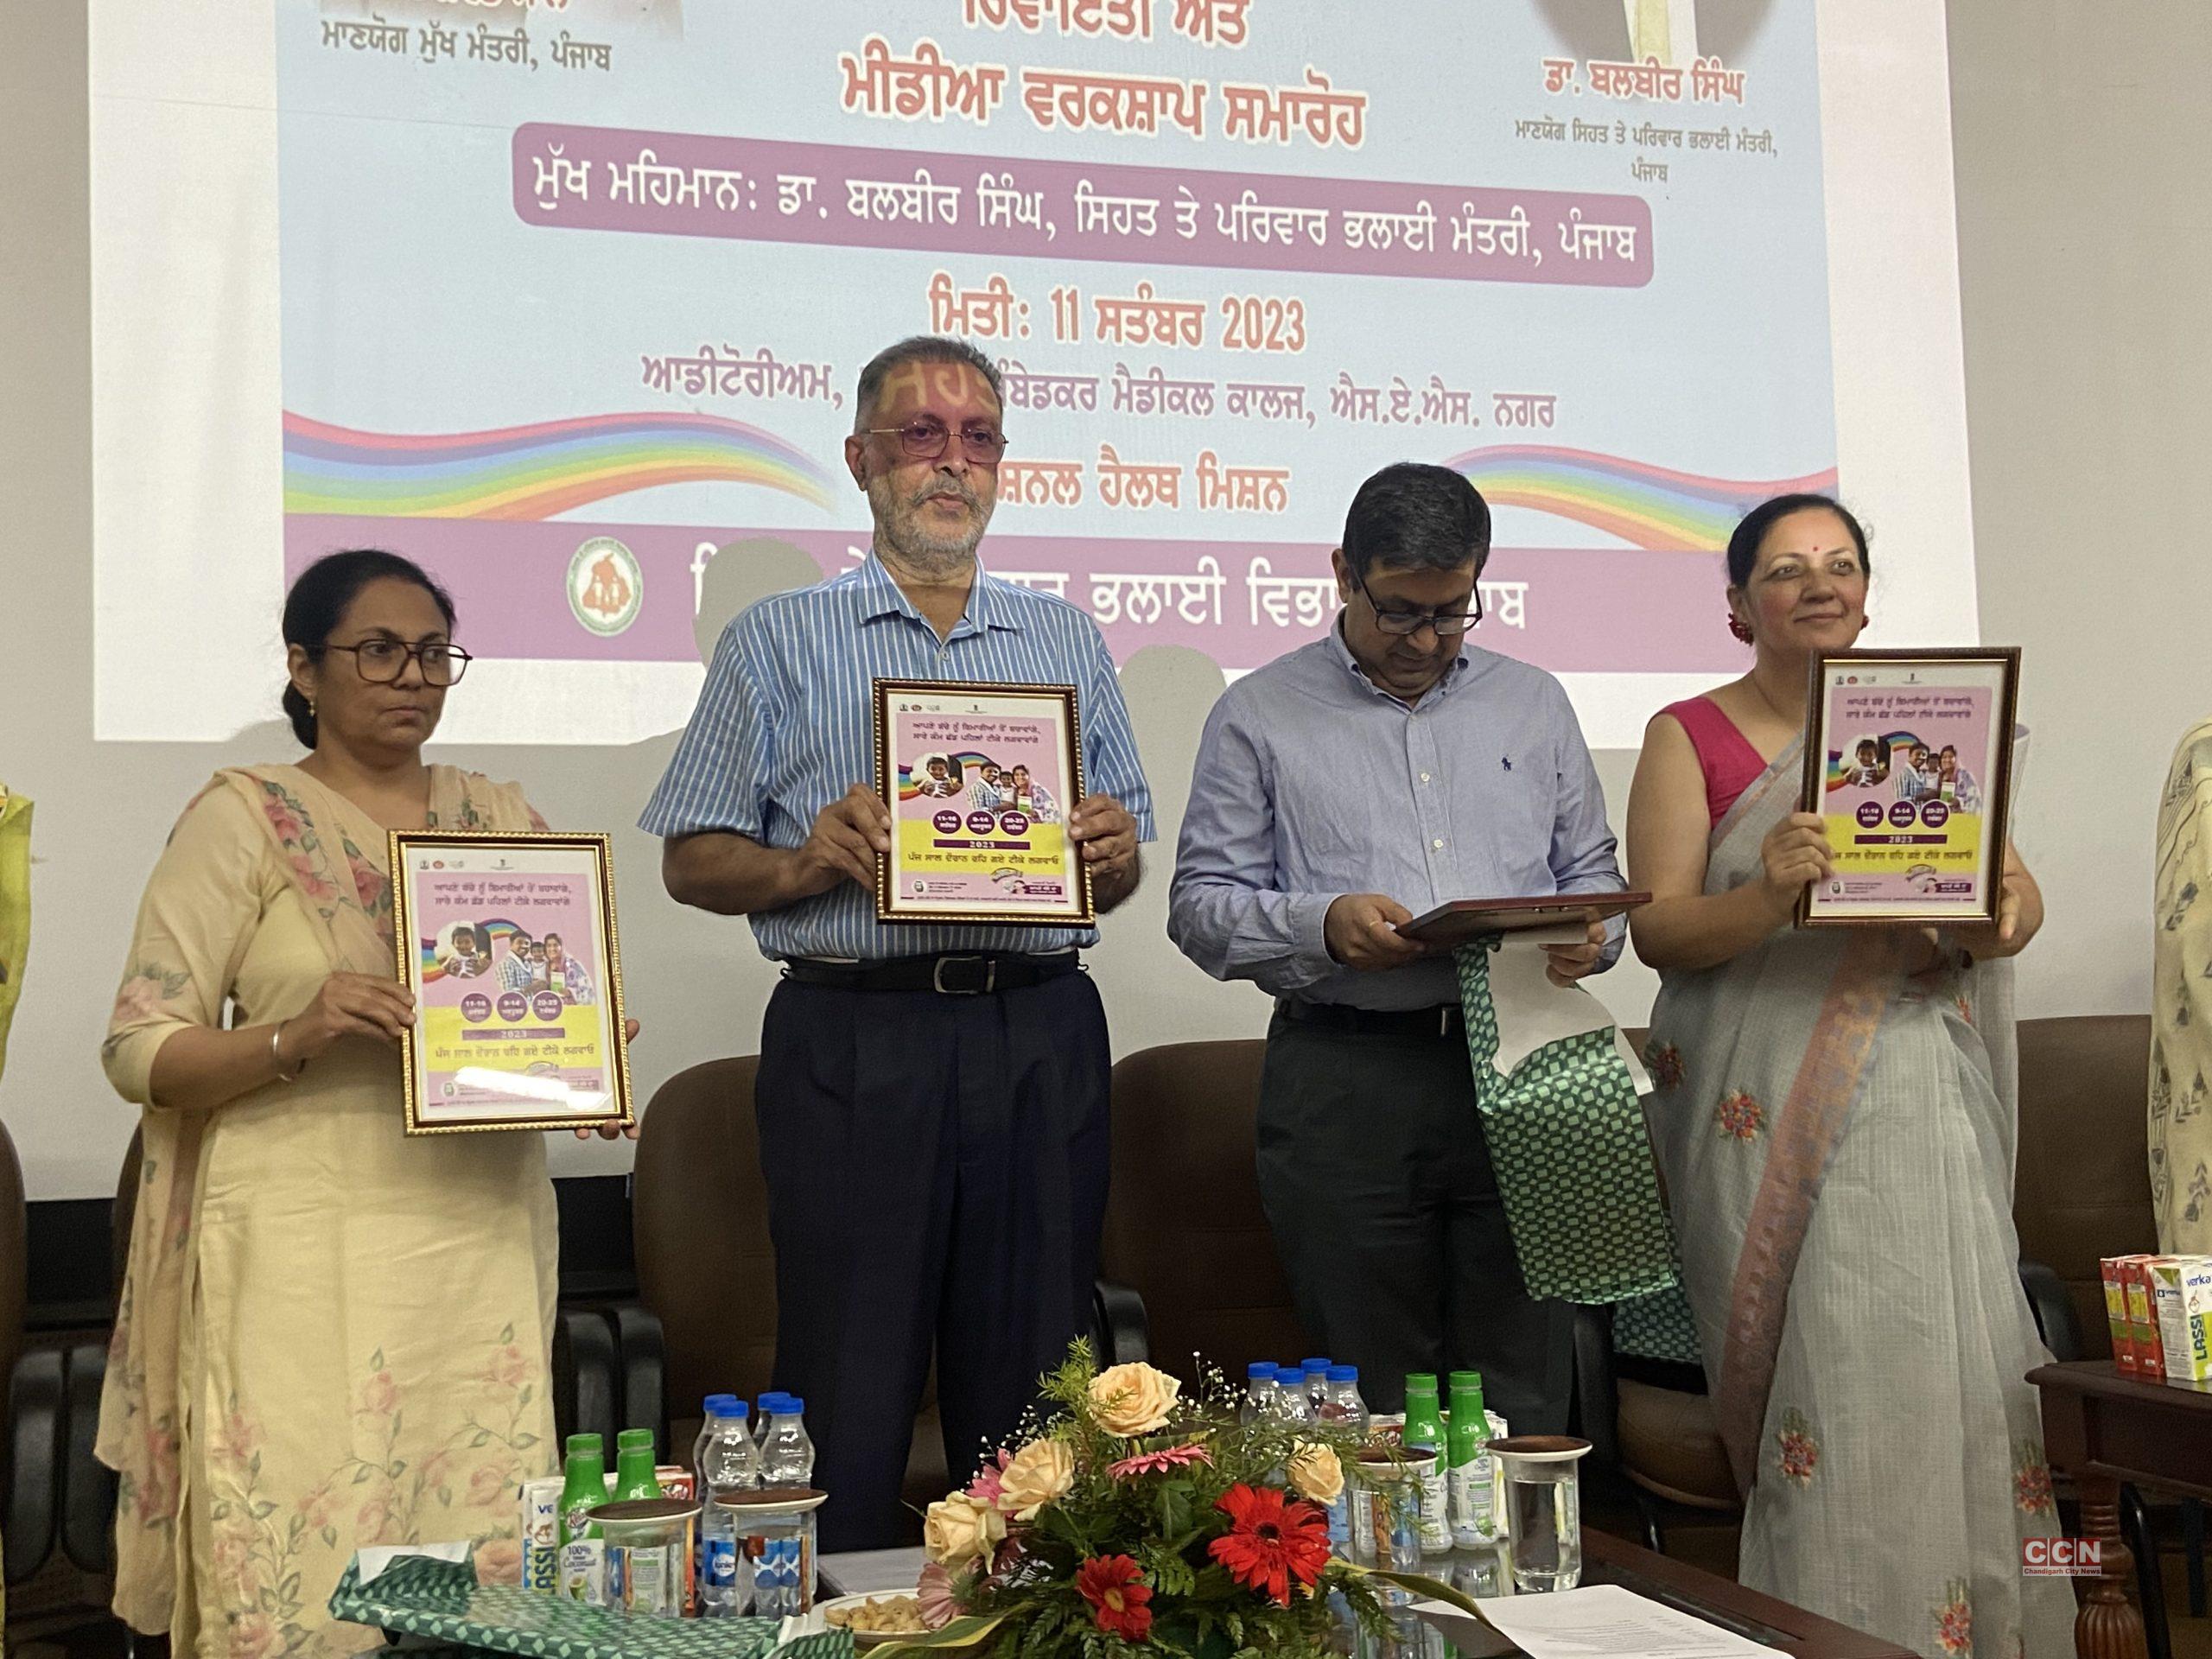 Health Minister Dr. Balbir Singh launches Intensified Mission Indradhanush 5.0